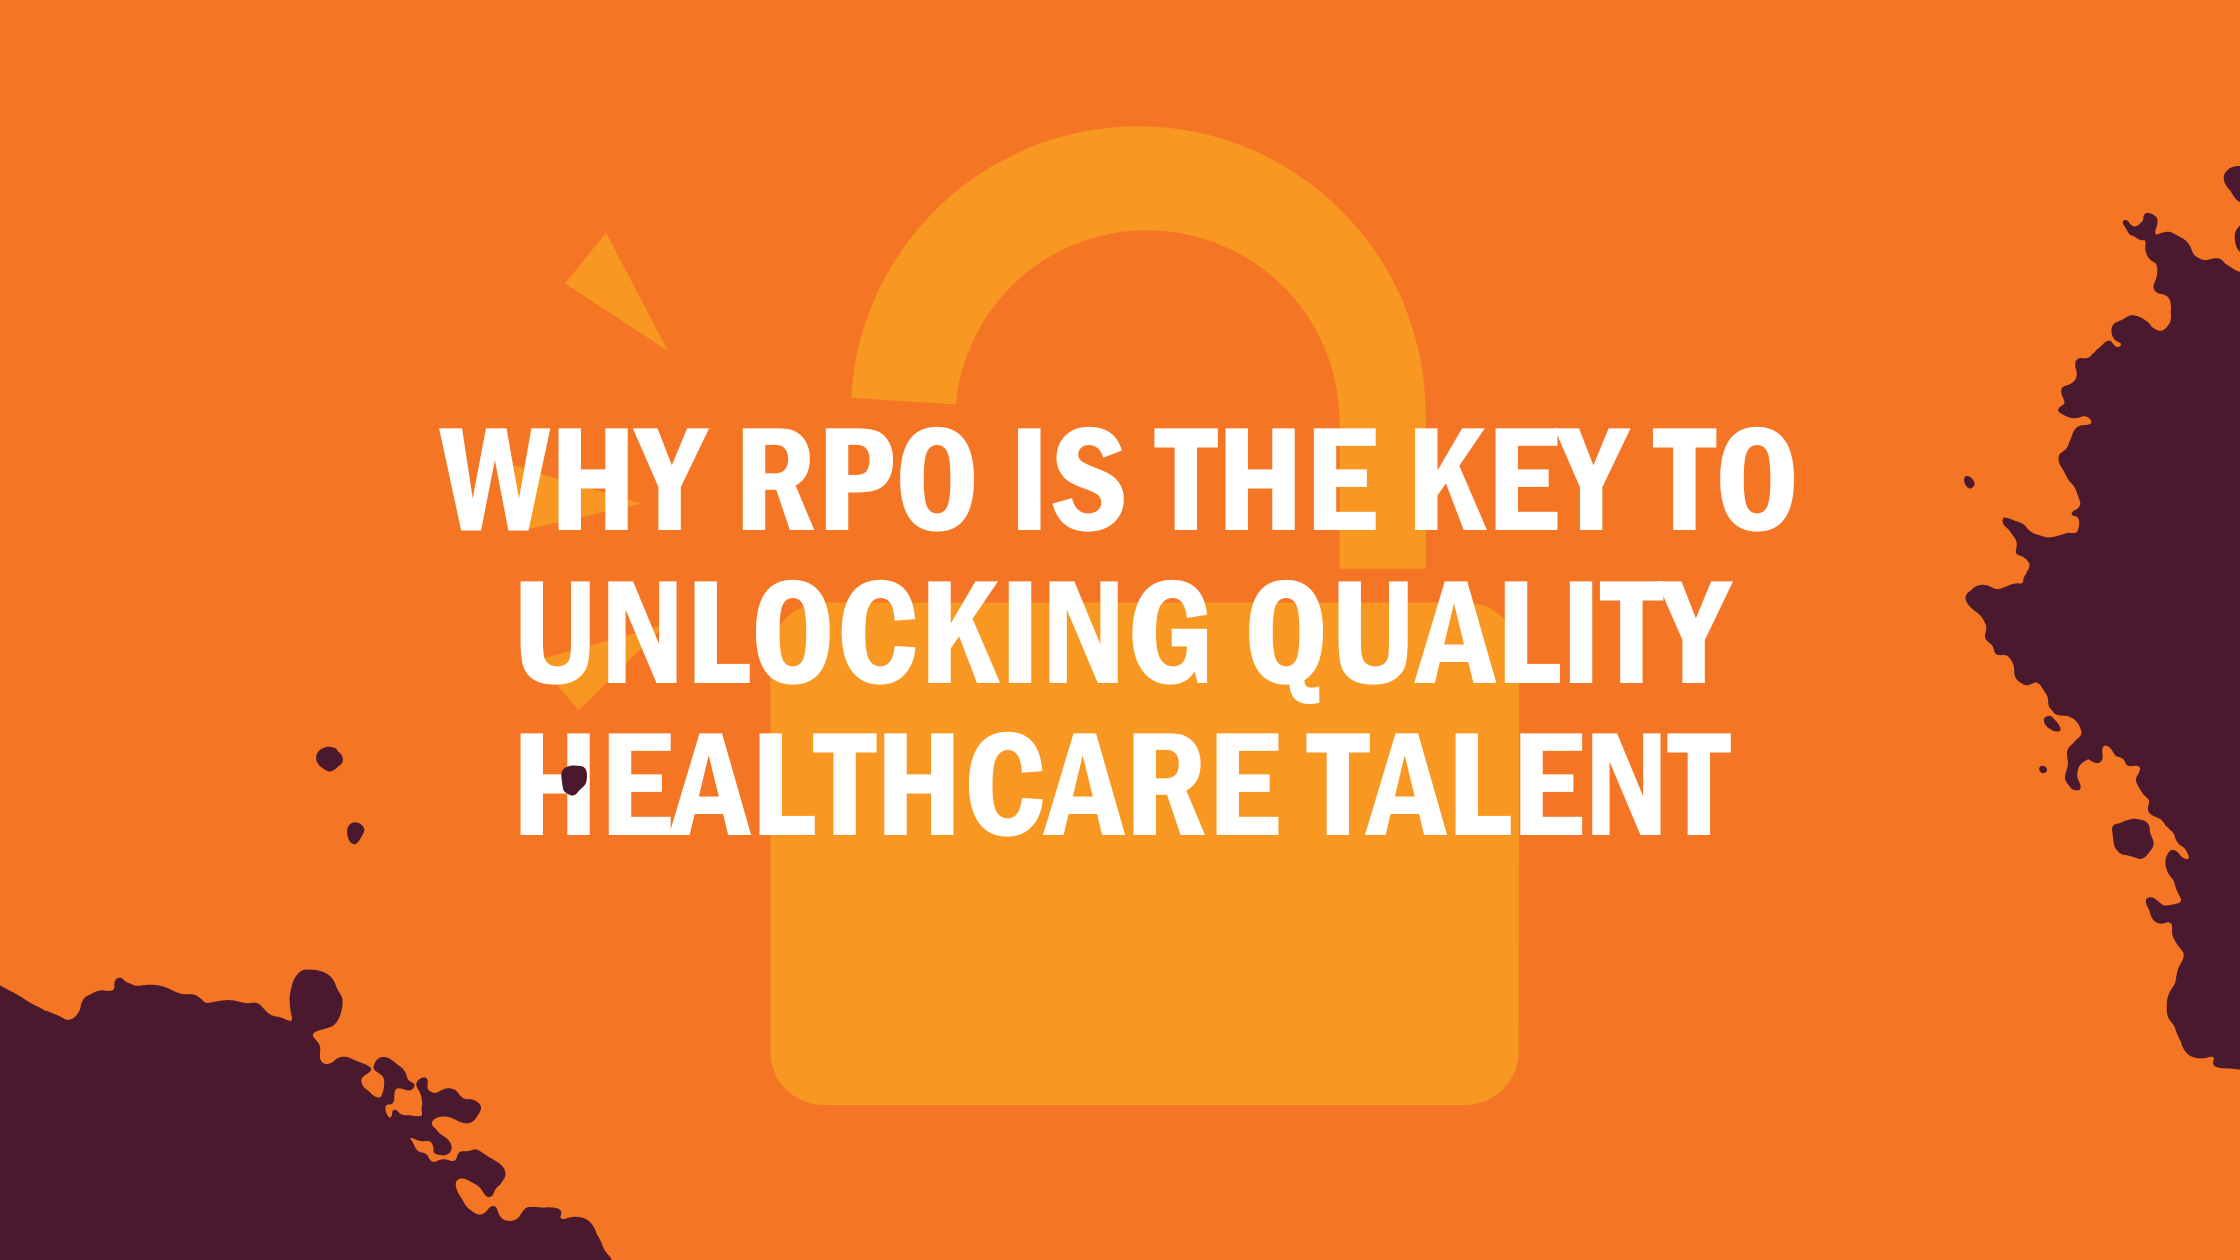 Why RPO is the Key to Unlocking Quality Healthcare Talent